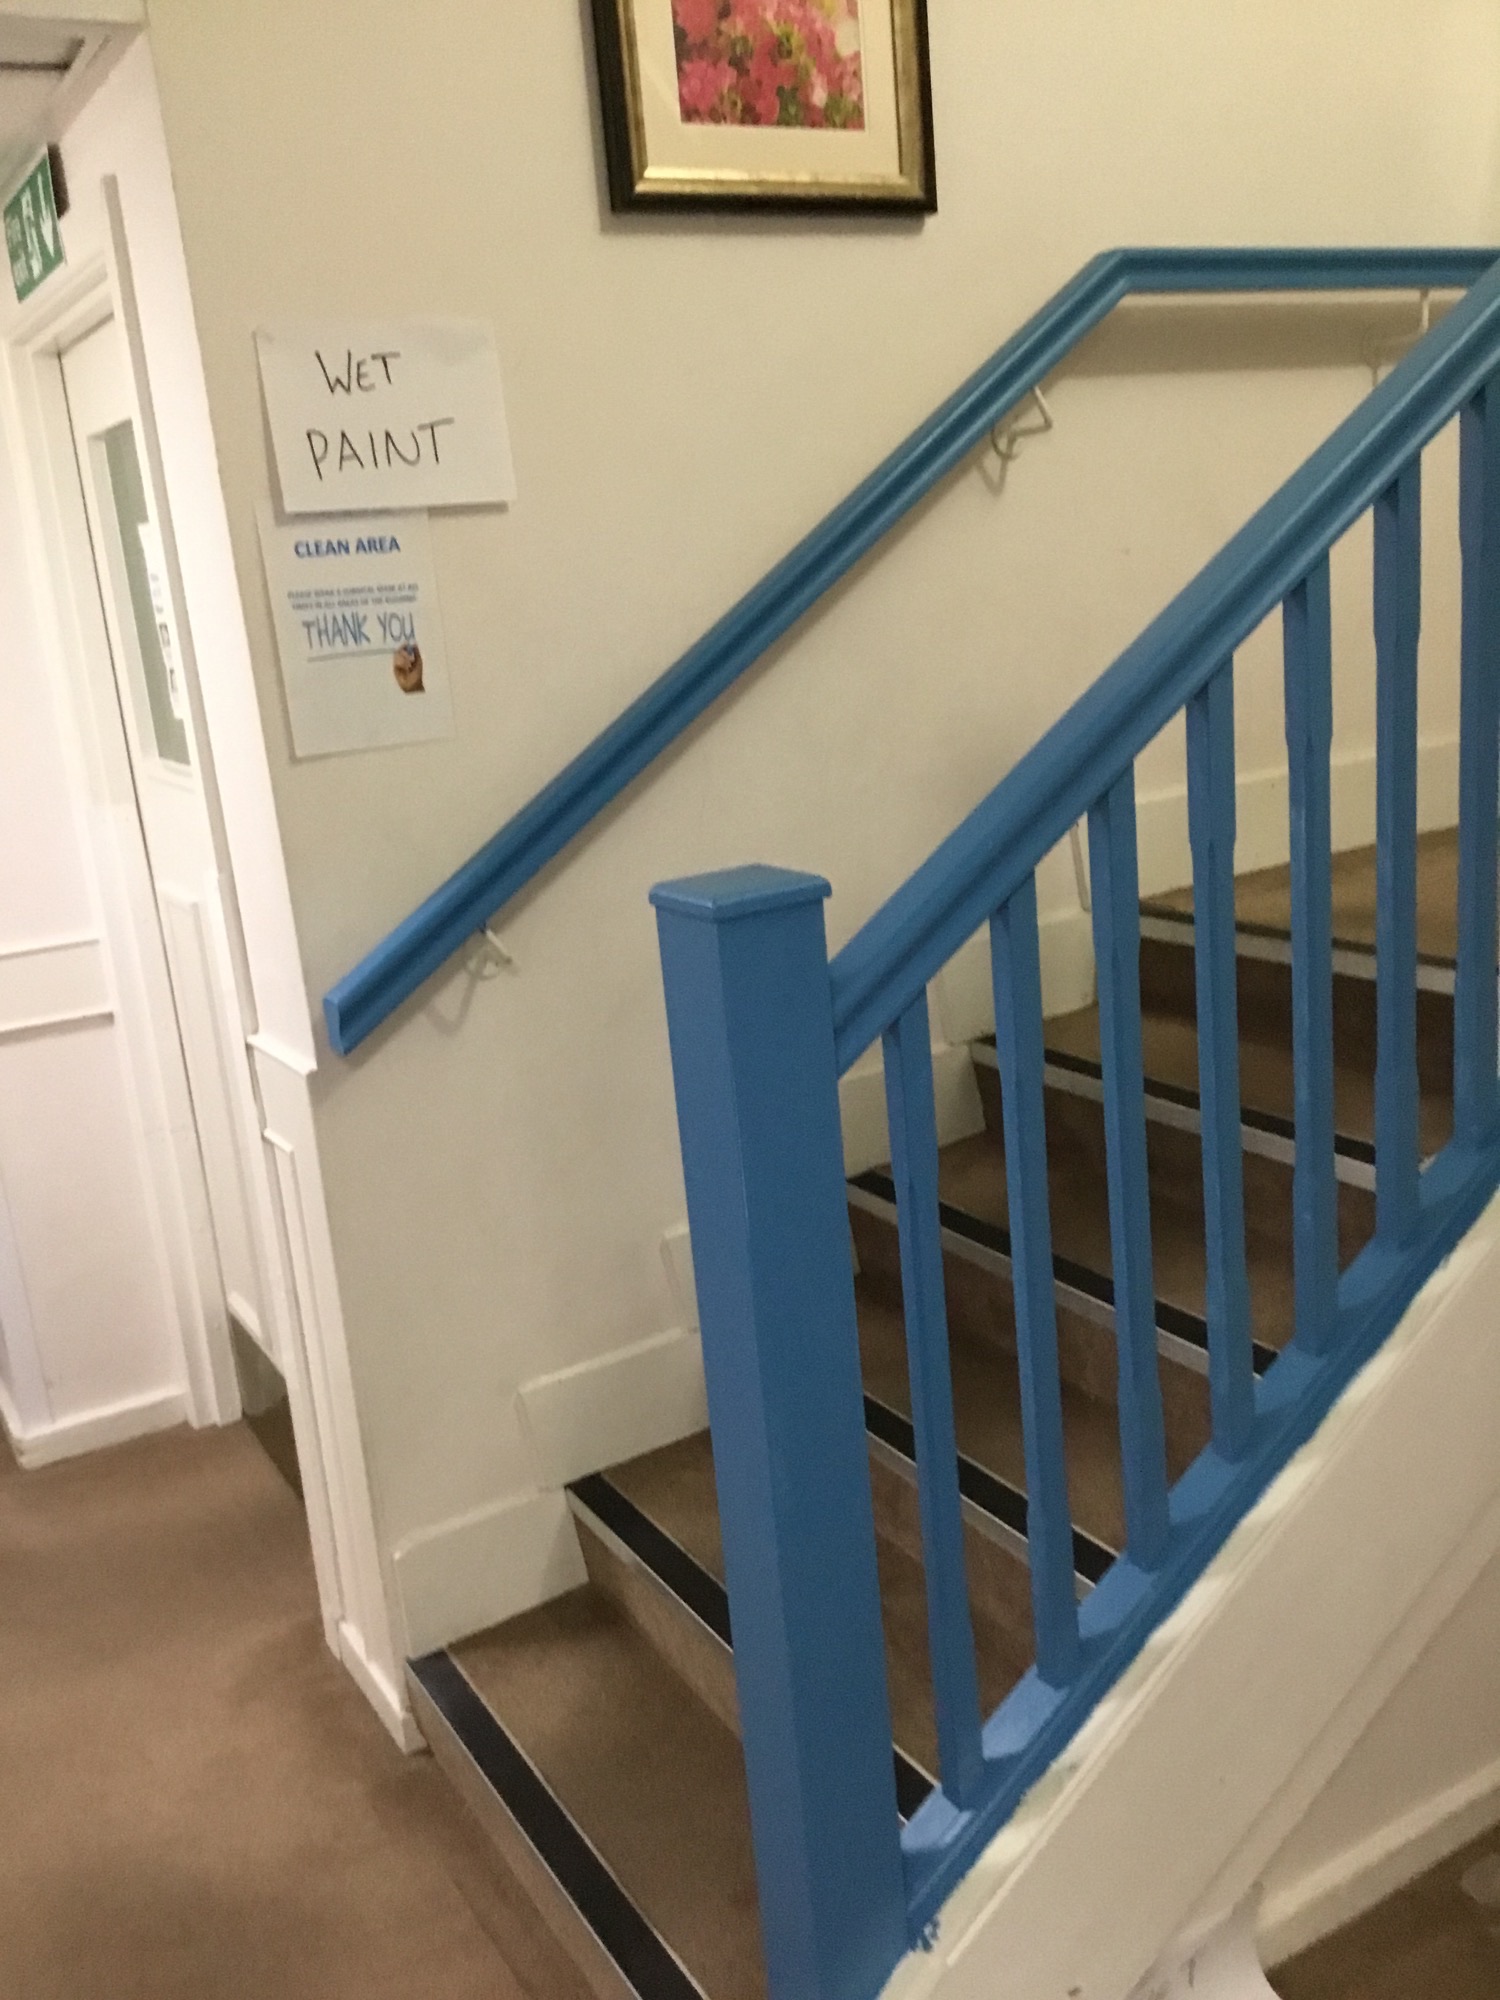 Handrails painted blue ten days after receiving report